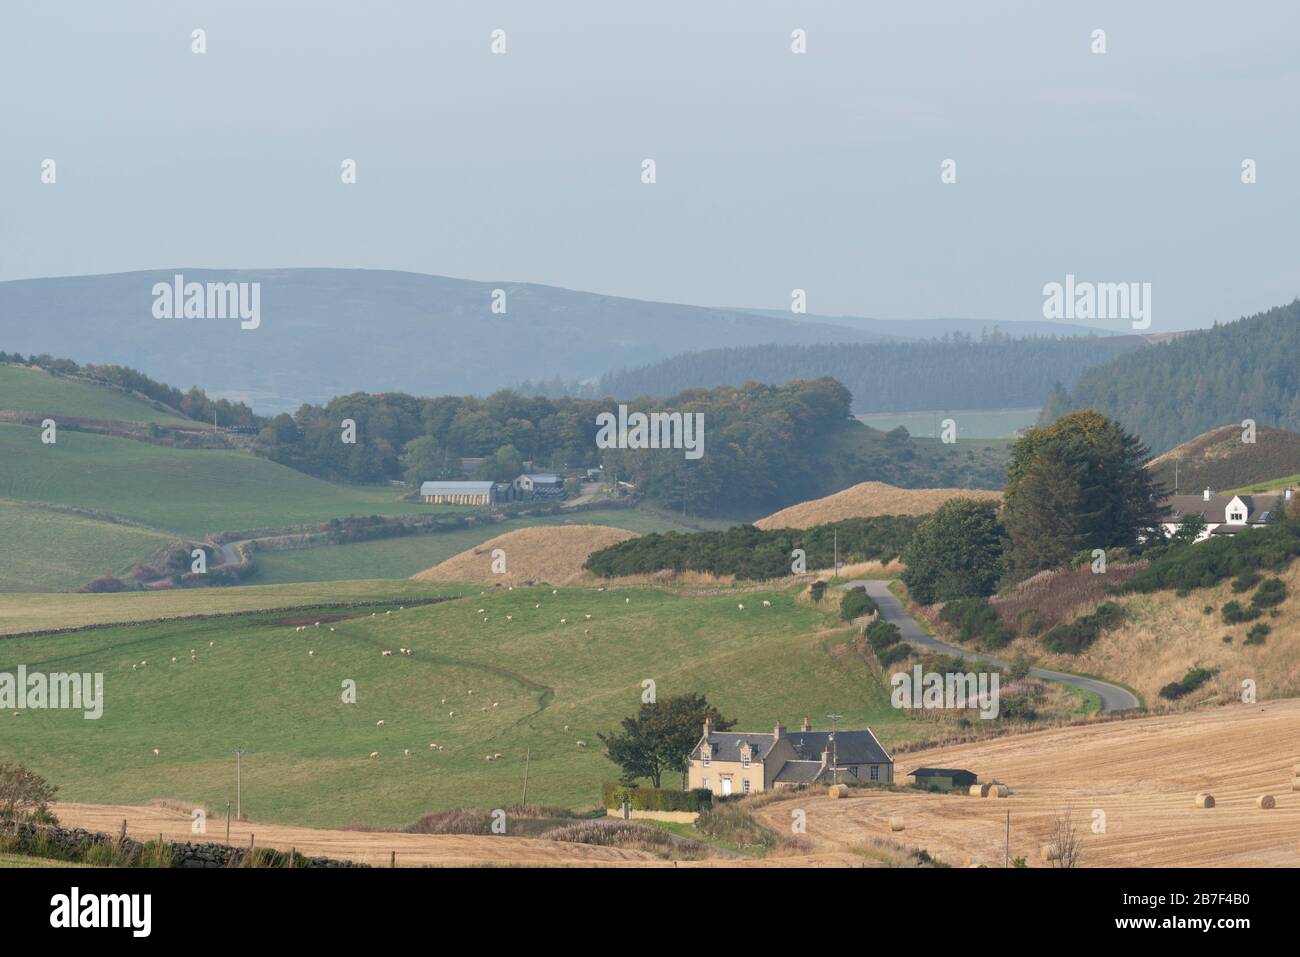 A Farming Community Surrounded by Livestock and Arable Fields in the Aberdeenshire Countryside Stock Photo